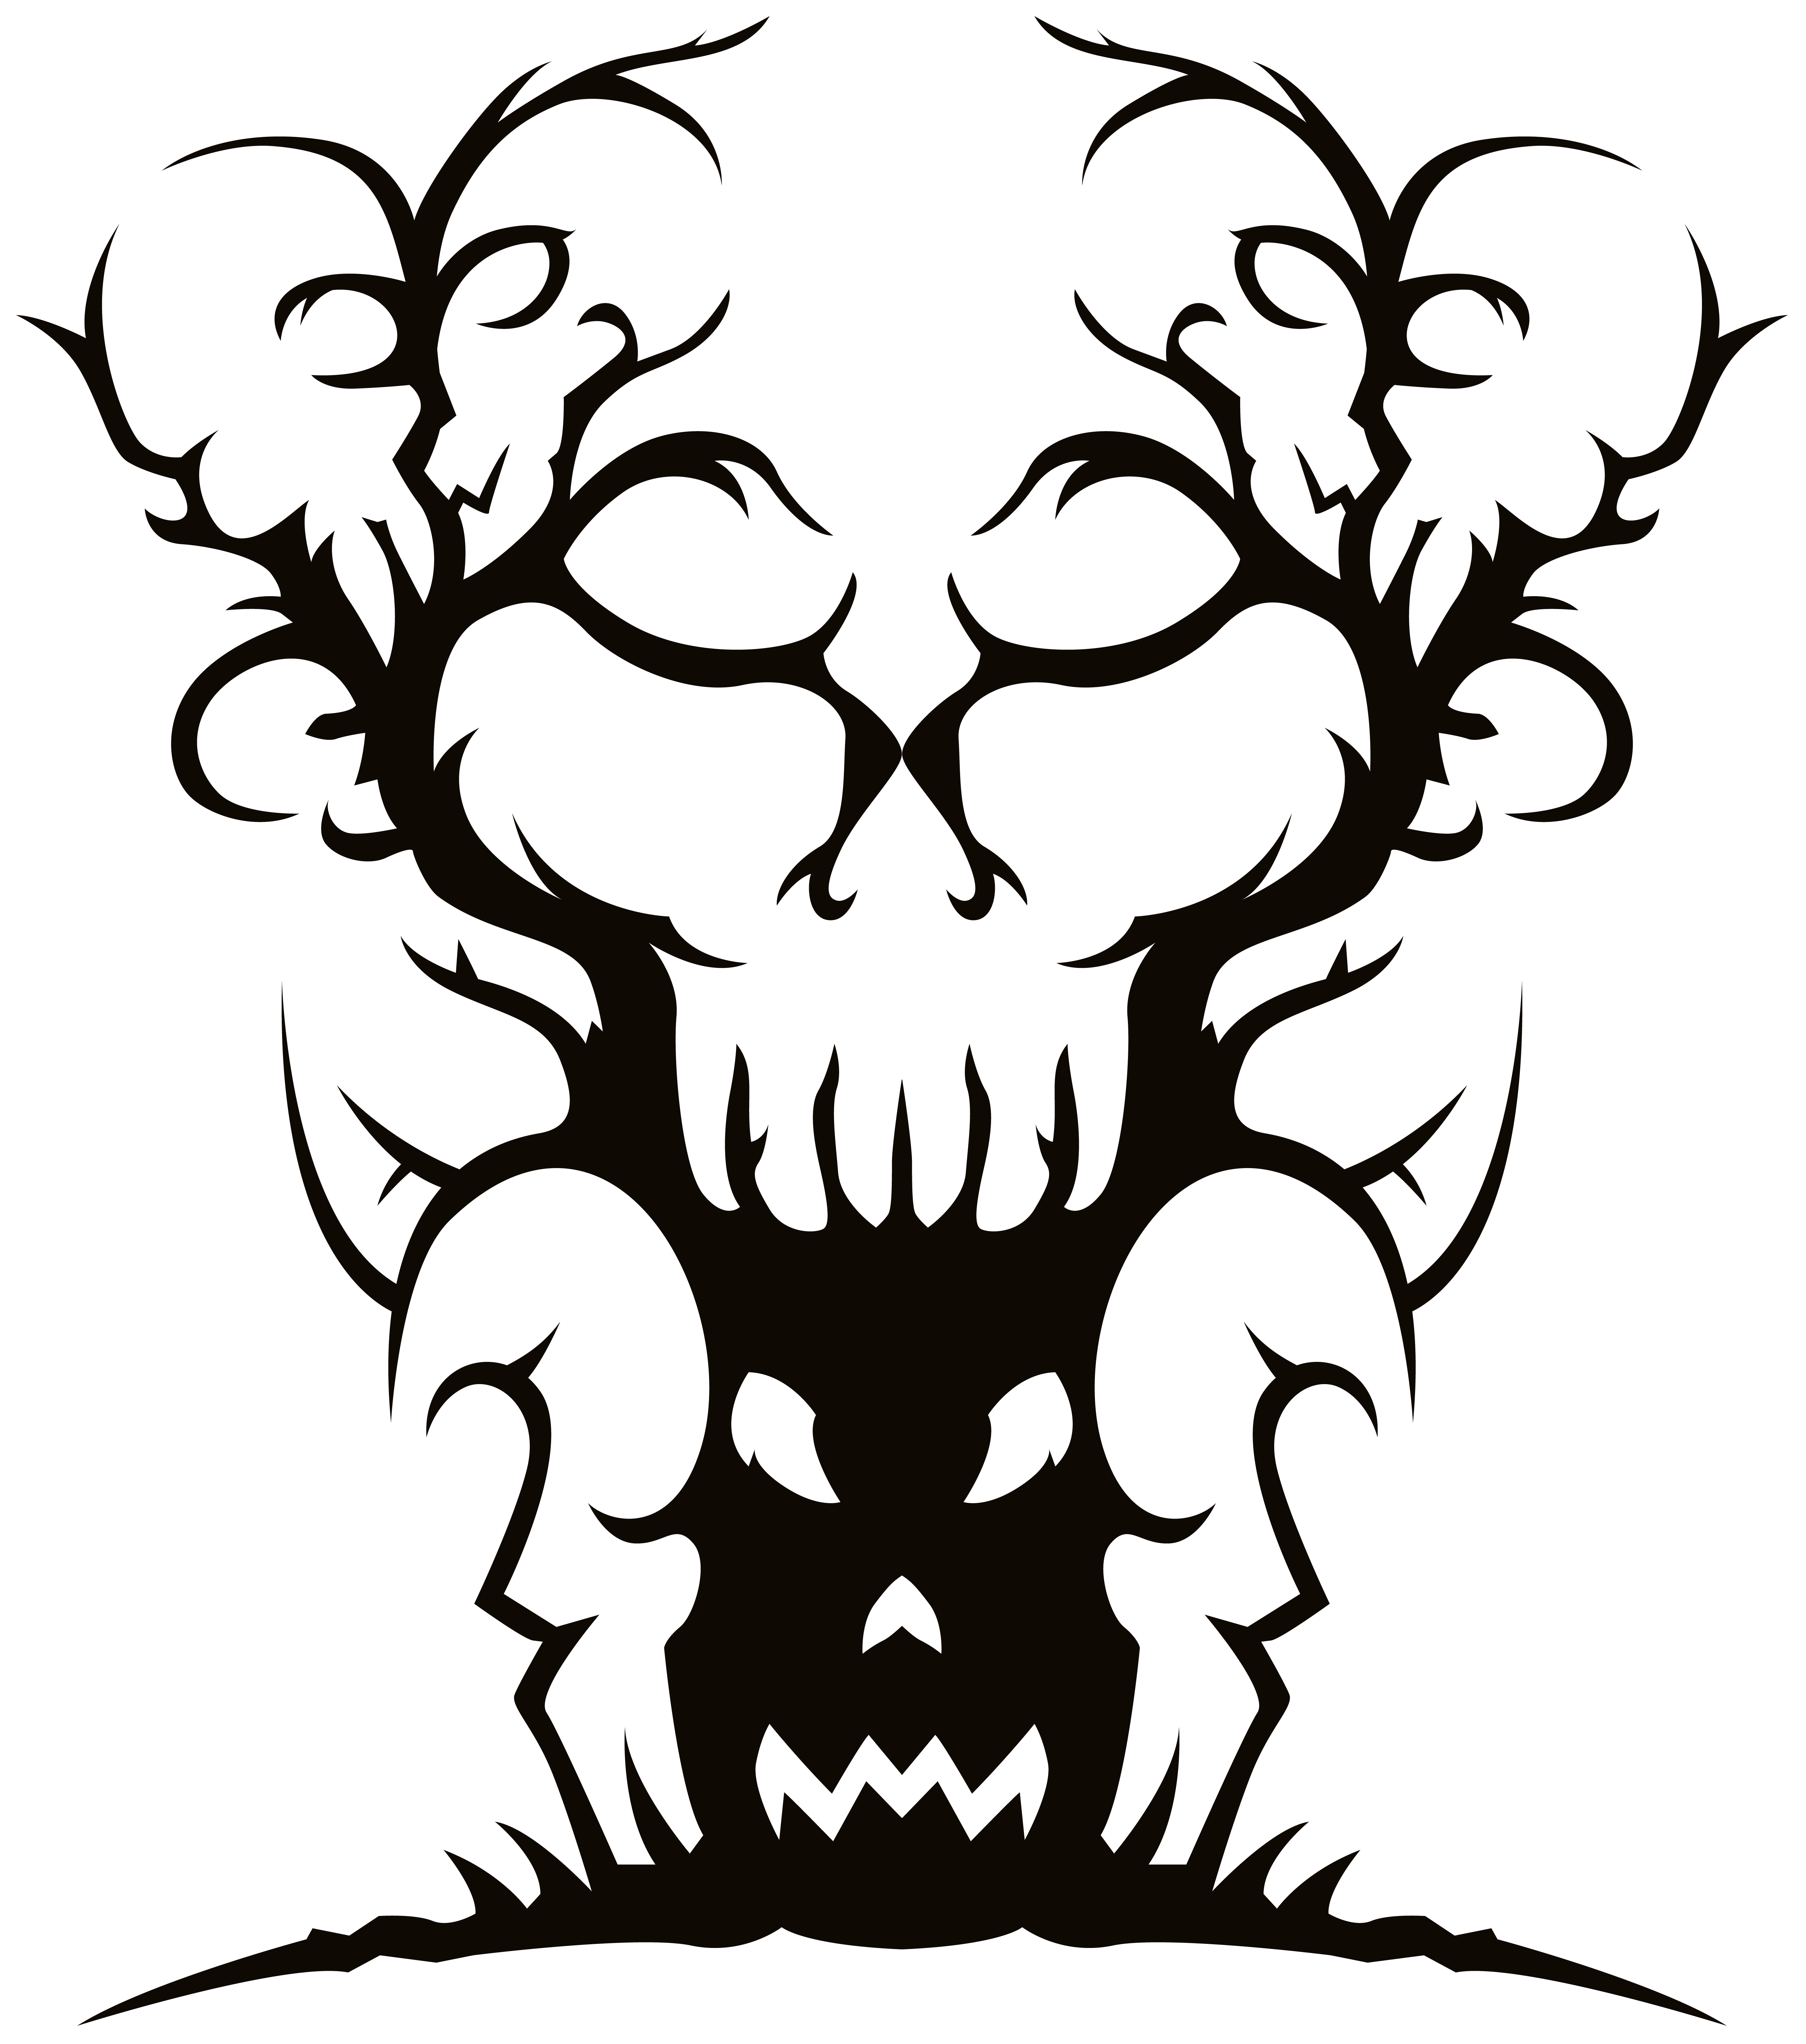 Scary Spooky Tree PNG Clipart Image.